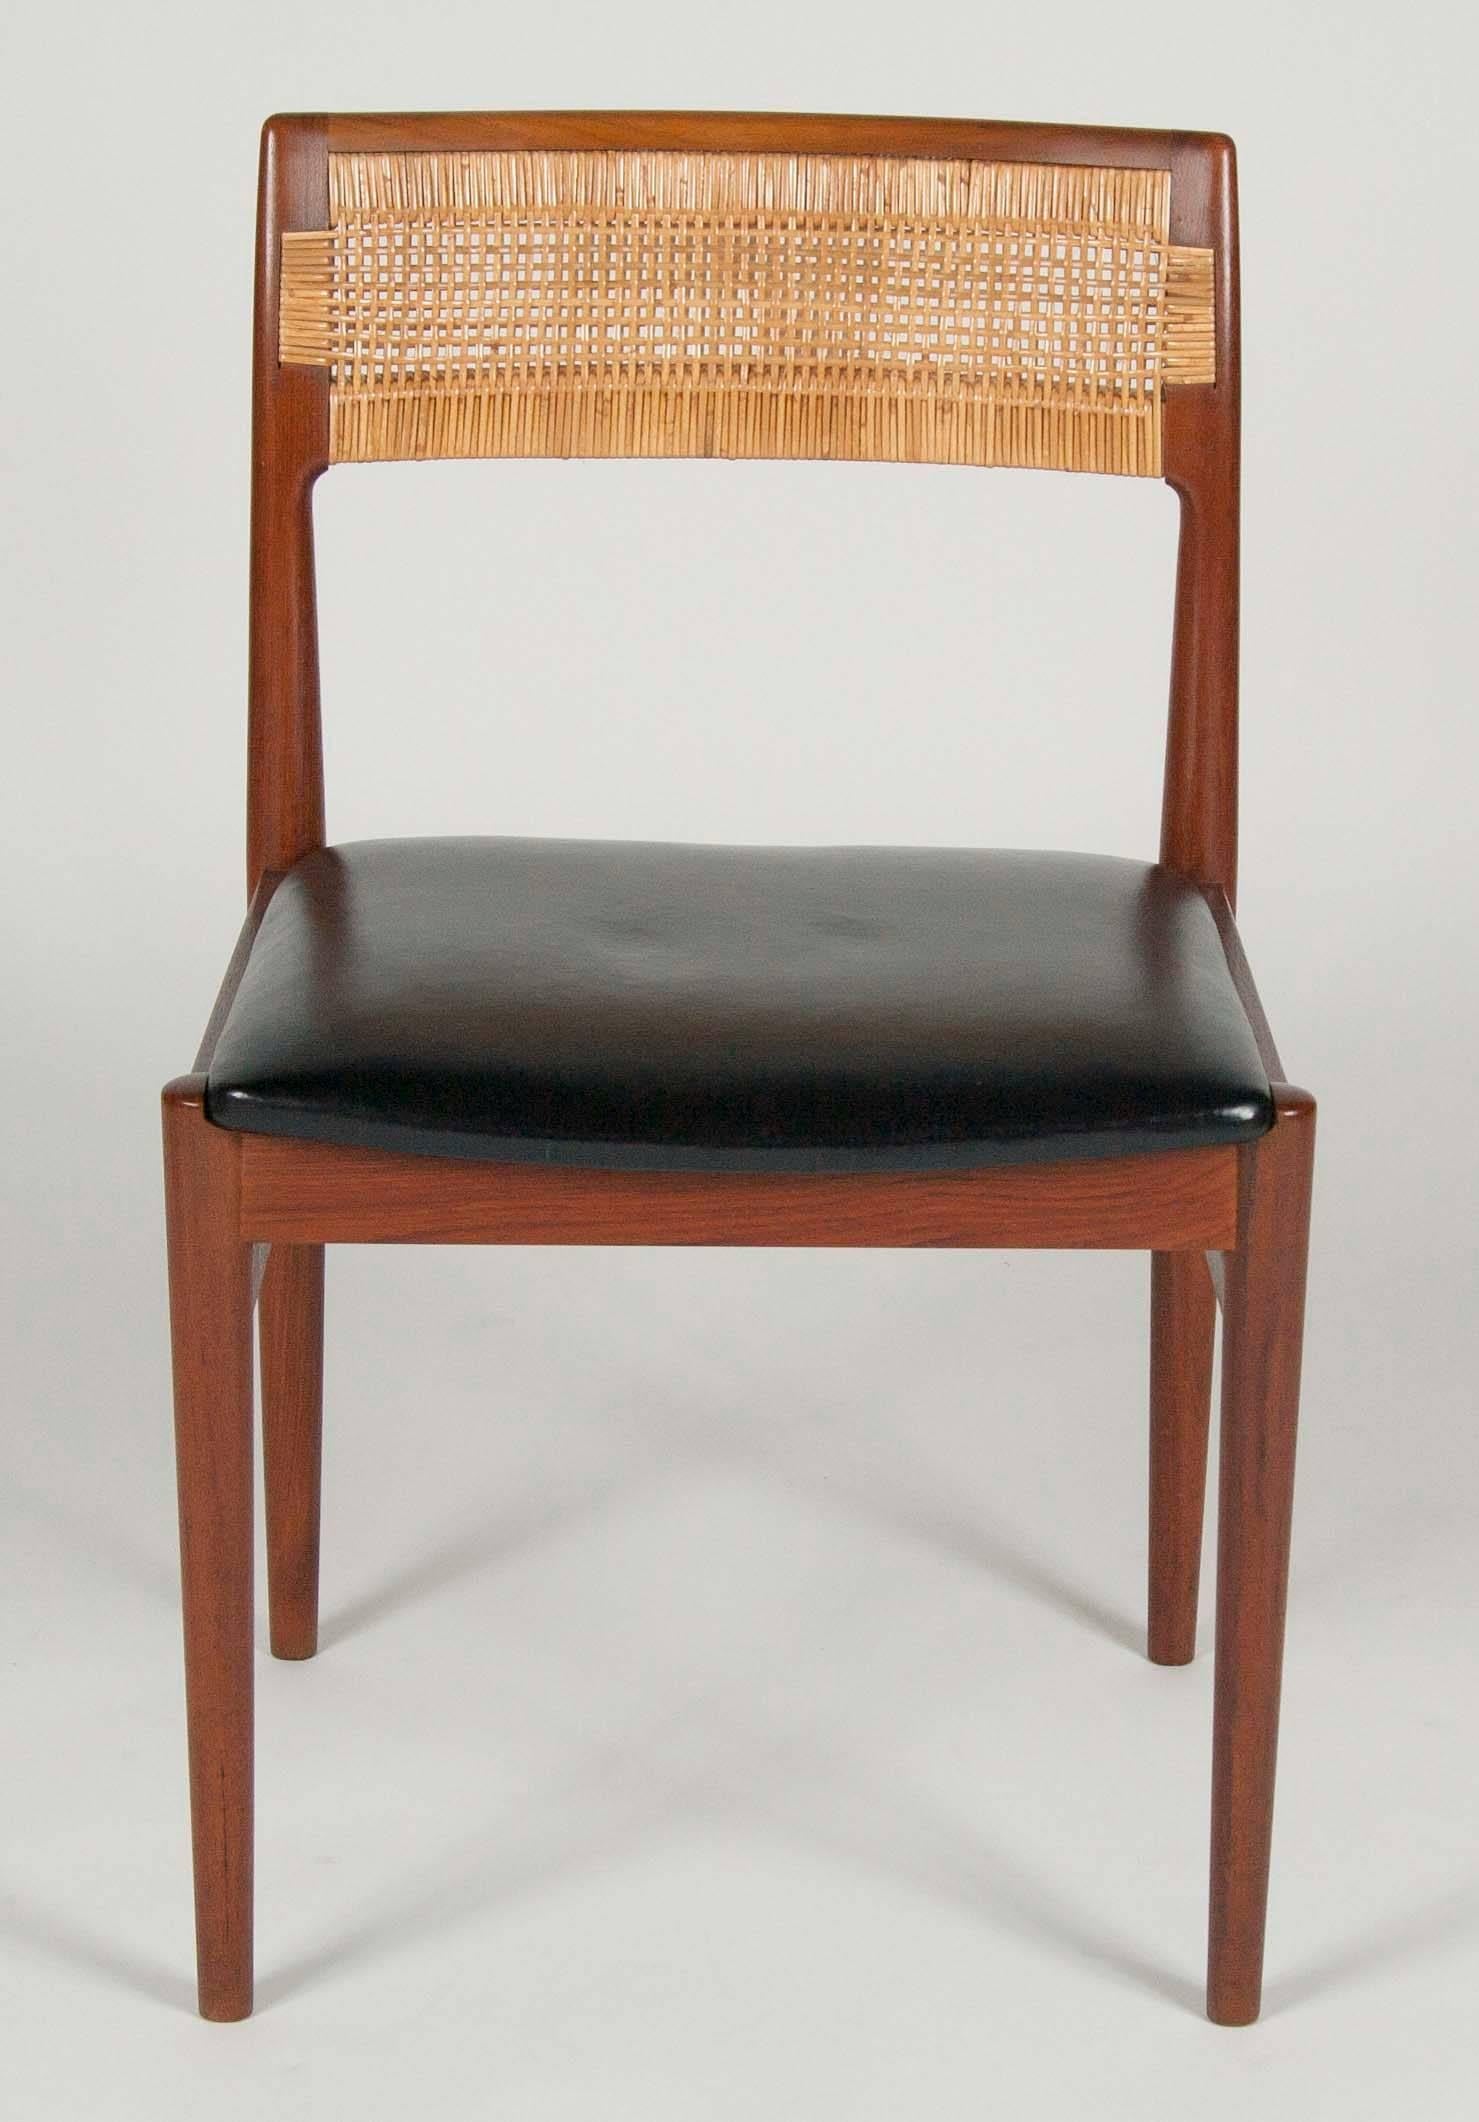 A set of four teak side chairs by Erik Worts with leather seats and caned back rests. Design W26. Newly re-caned.